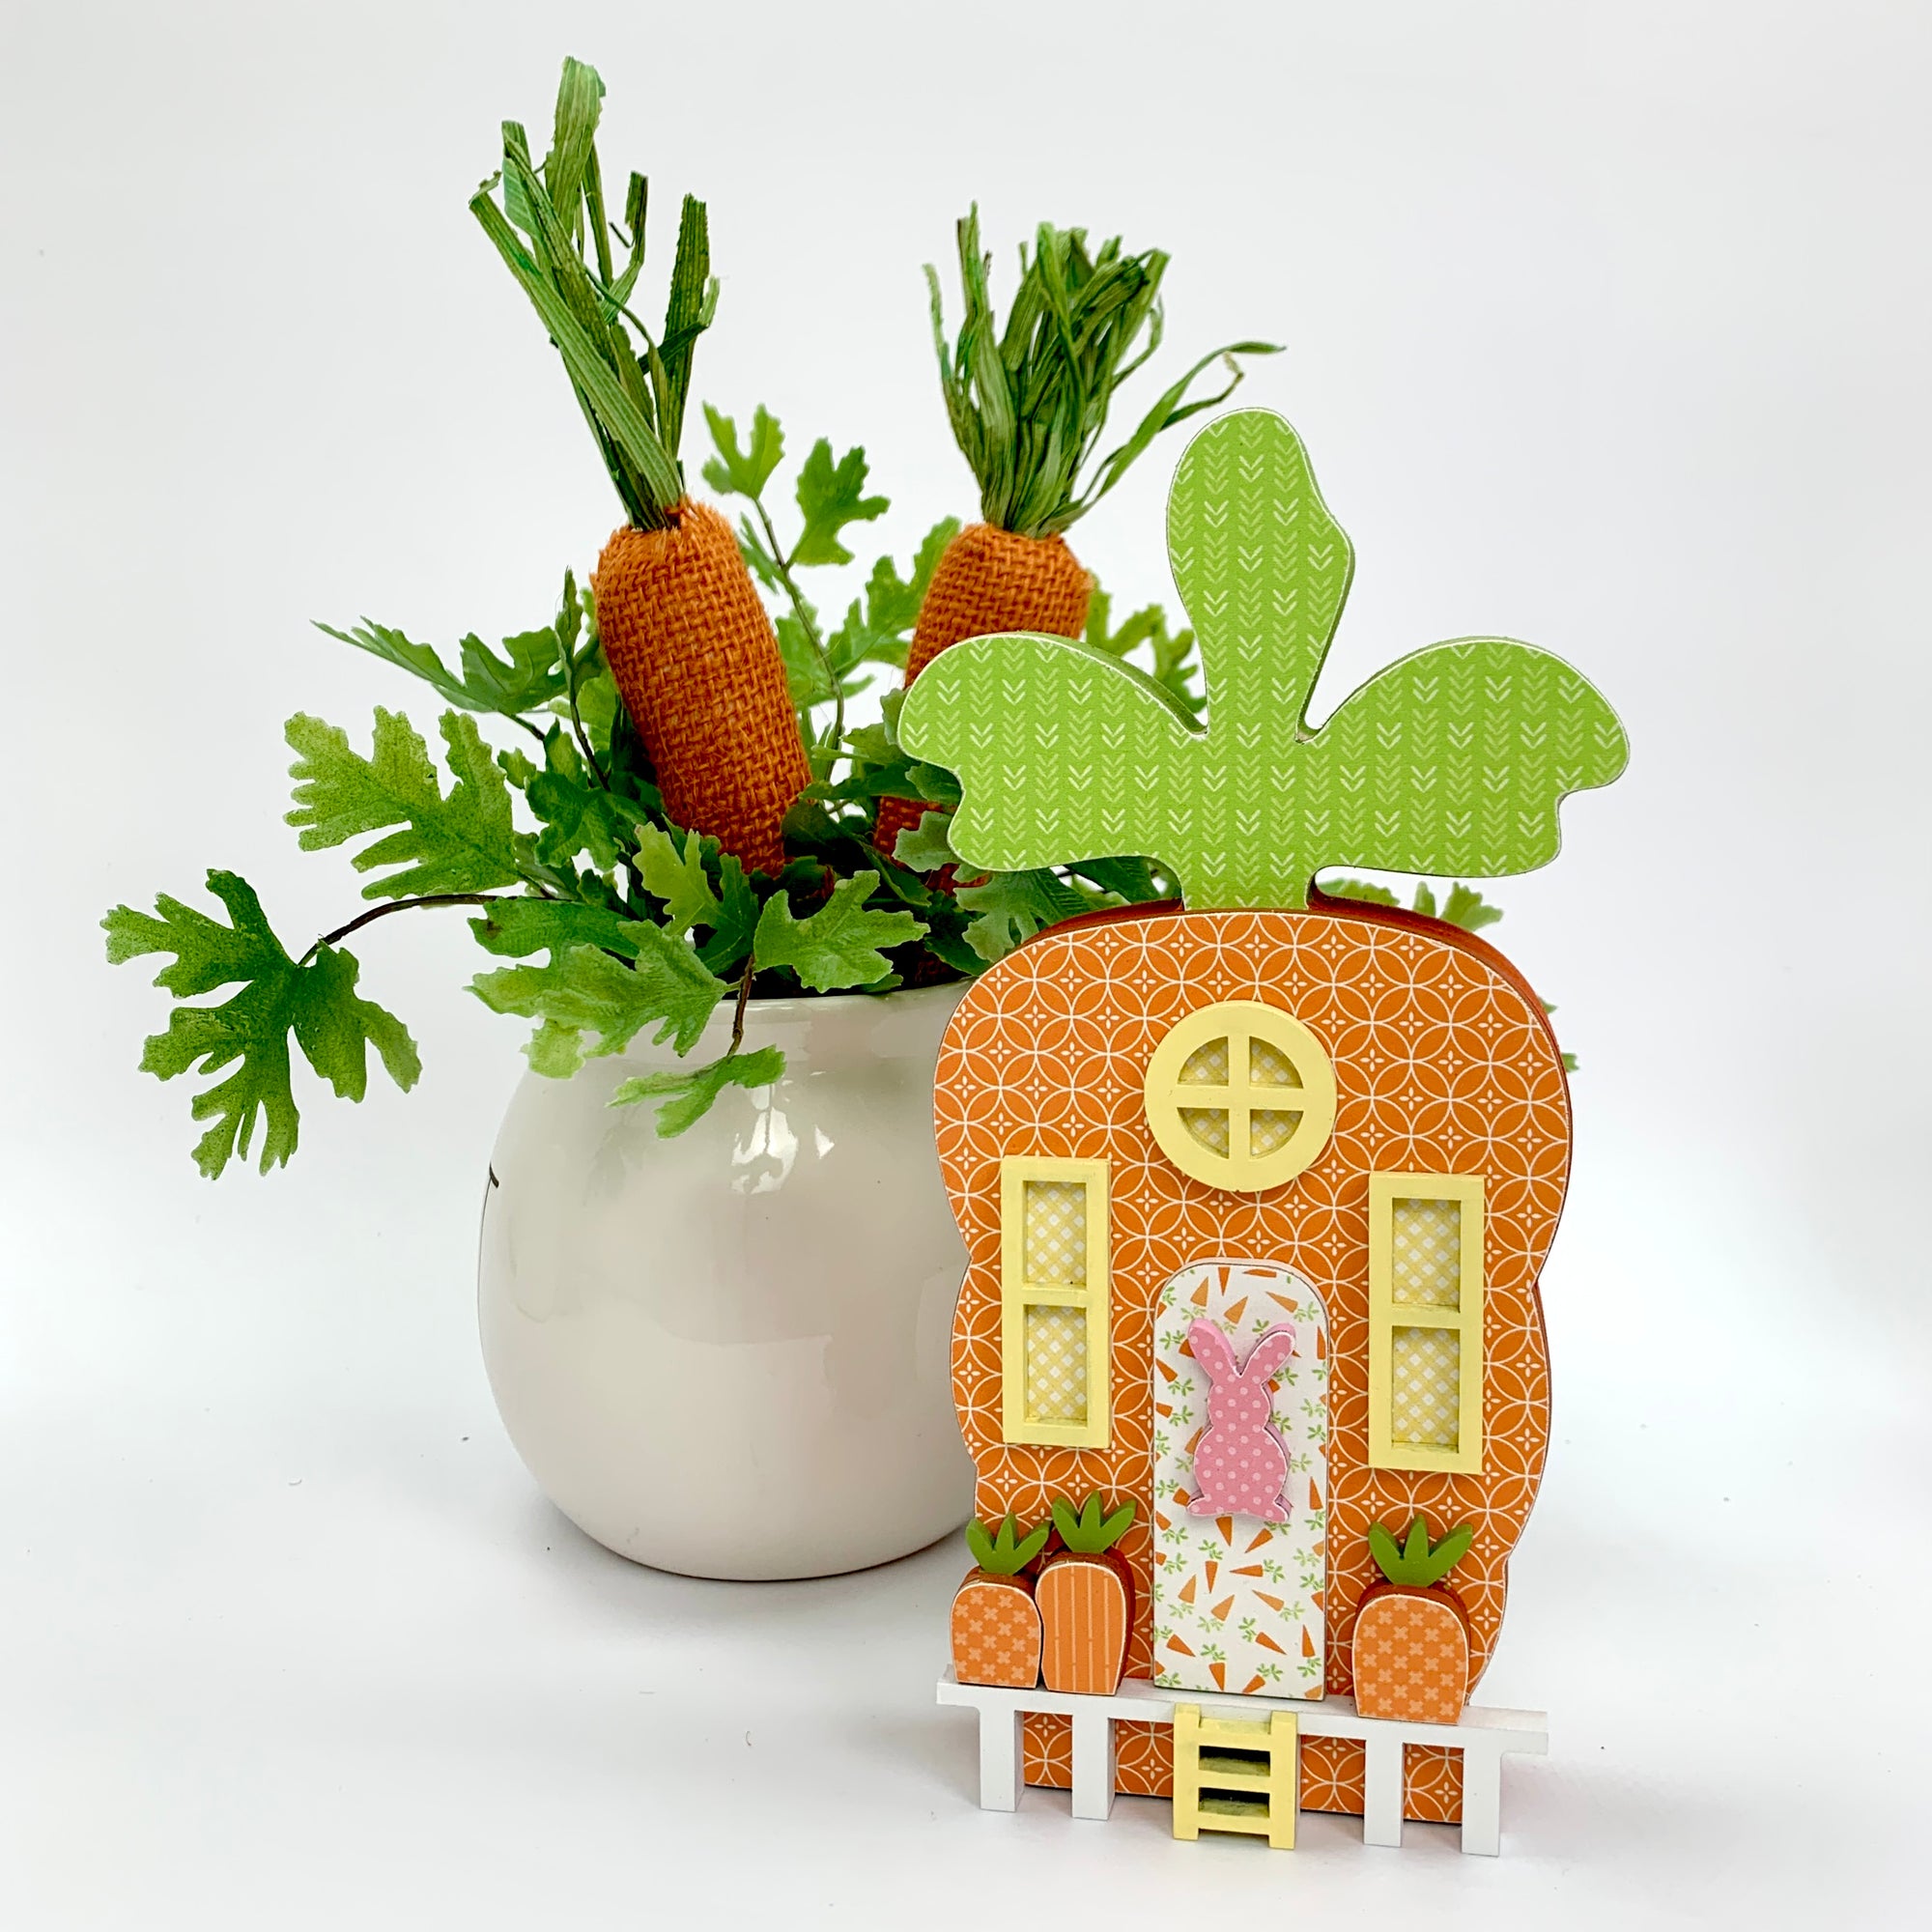 Carrot house wood decoration with burlap carrot in pot